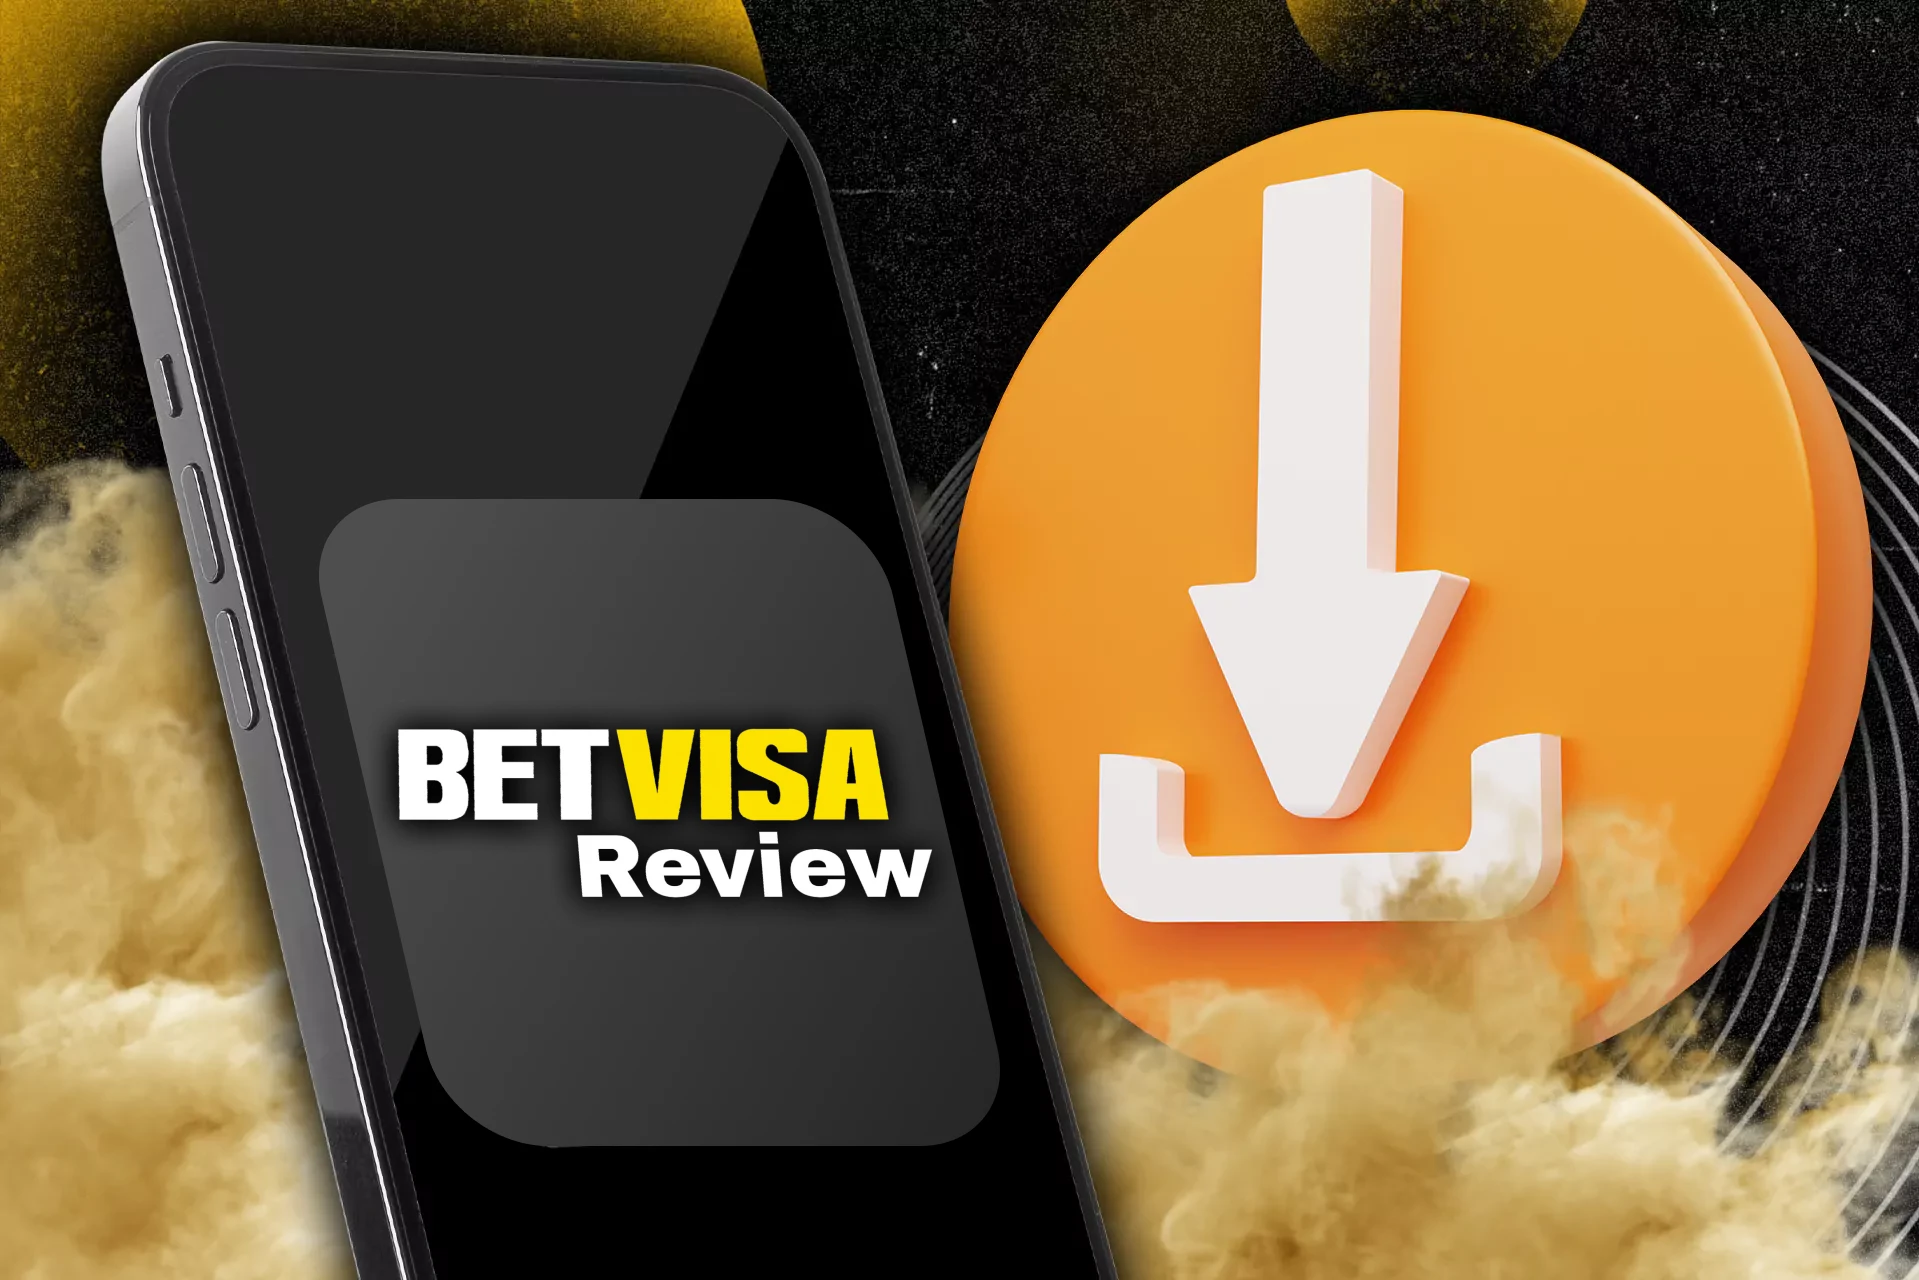 Install the BetVisa app for a convenient betting.